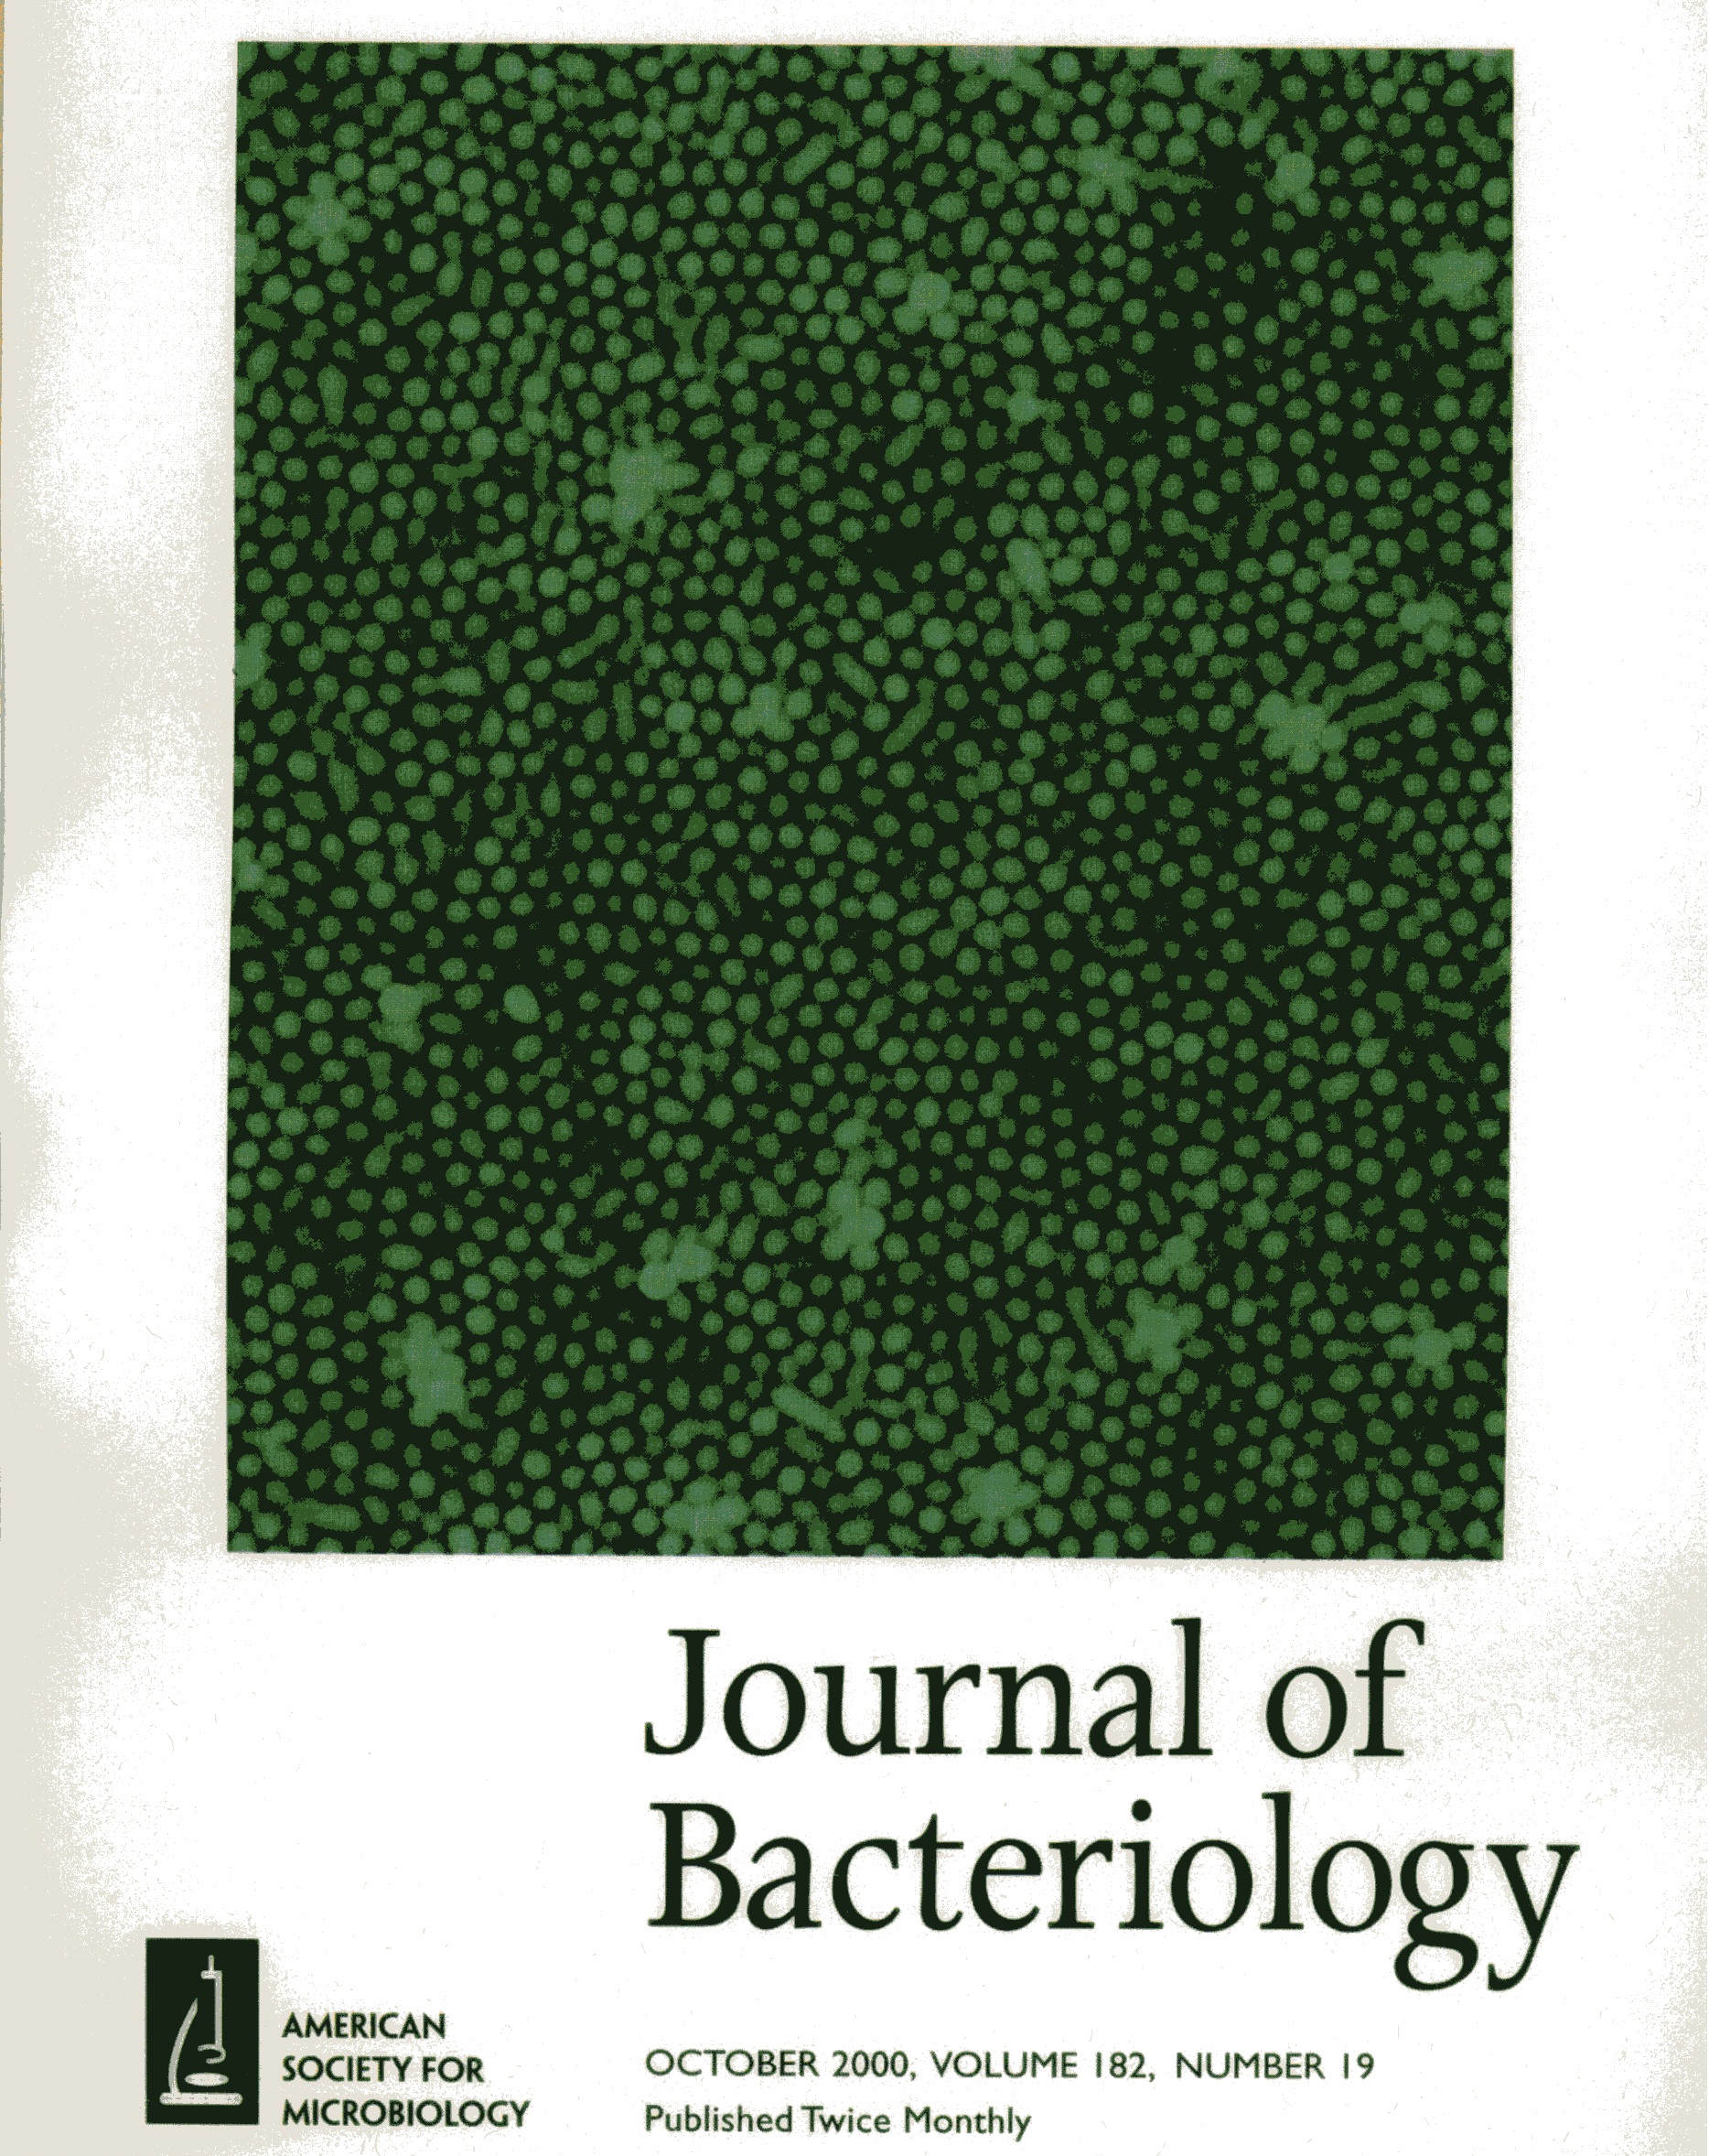 Journal of Bacteriology